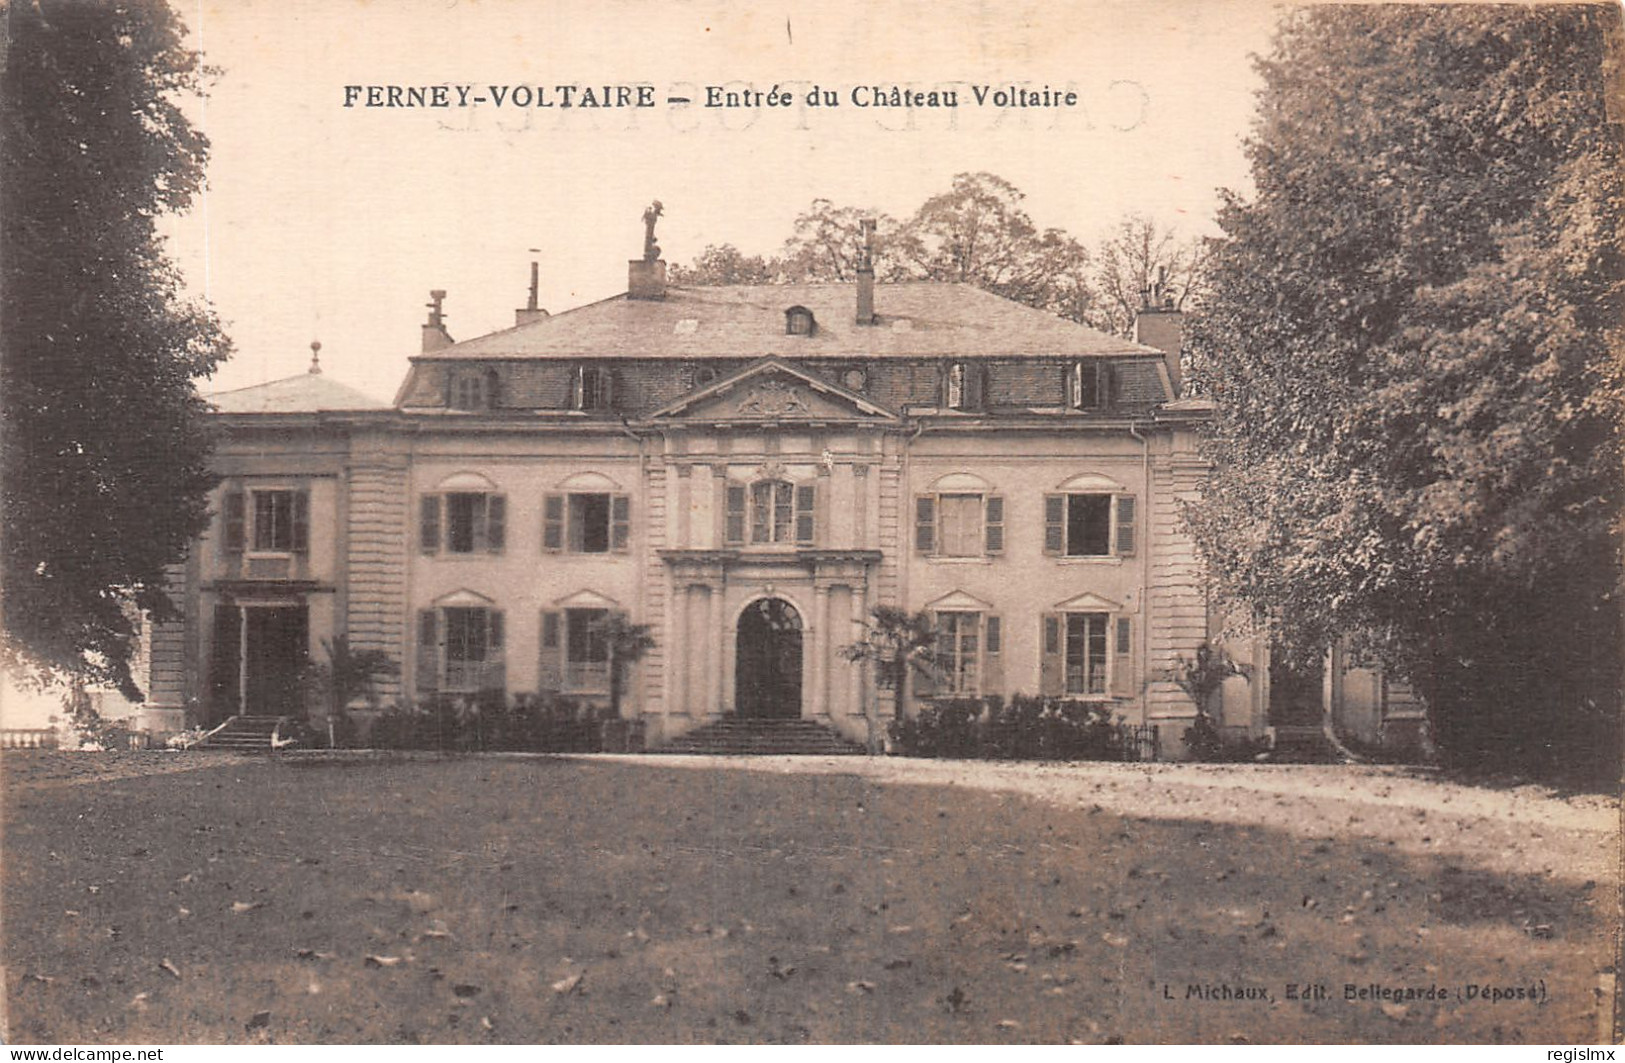 01-FERNEY VOLTAIRE-N°2114-C/0105 - Ferney-Voltaire